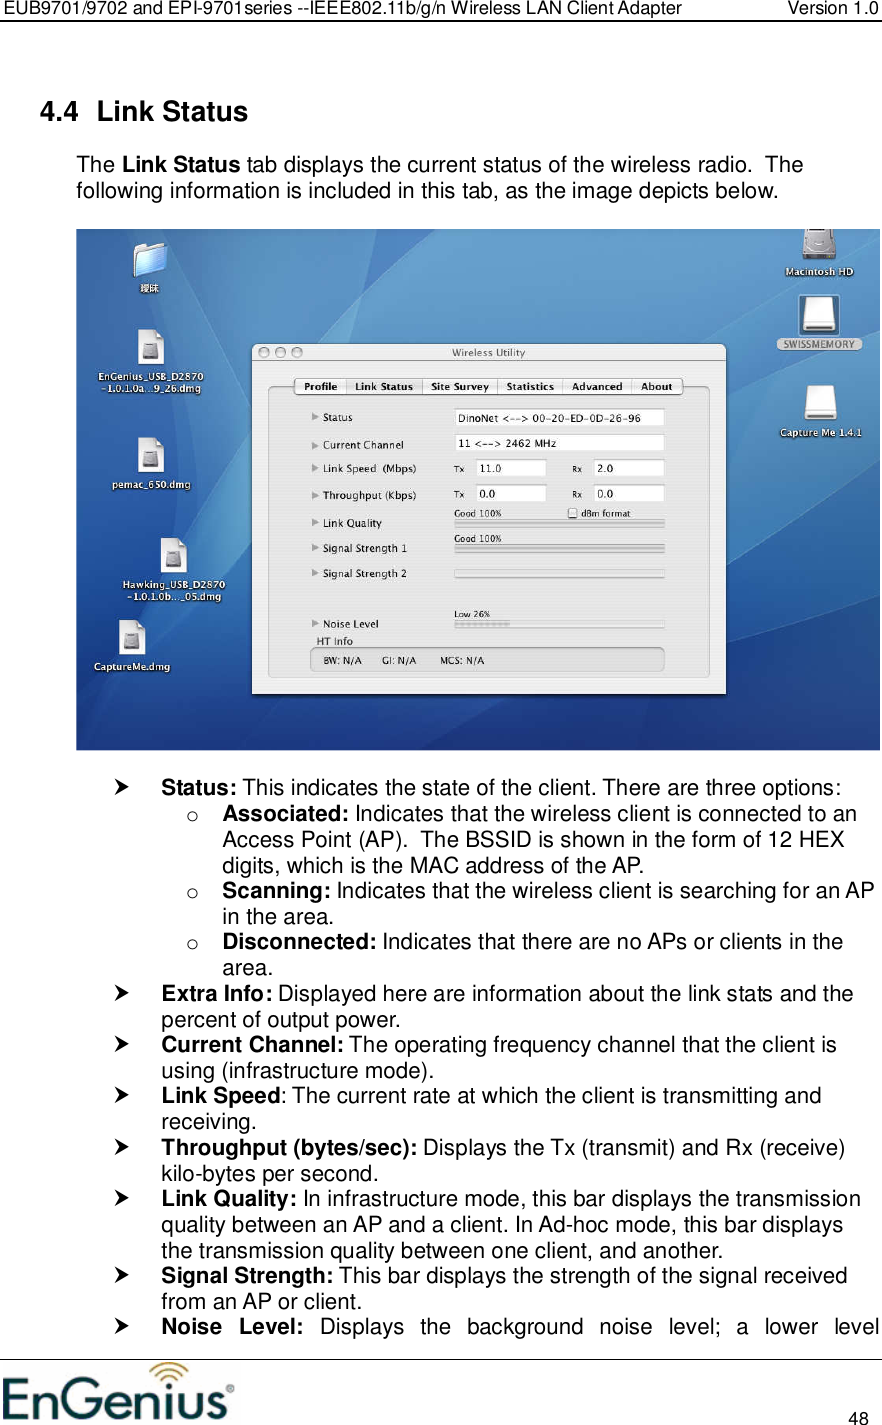 EUB9701/9702 and EPI-9701series --IEEE802.11b/g/n Wireless LAN Client Adapter  Version 1.0                                                                                                                          48   4.4  Link Status The Link Status tab displays the current status of the wireless radio.  The following information is included in this tab, as the image depicts below.     Status: This indicates the state of the client. There are three options: o Associated: Indicates that the wireless client is connected to an Access Point (AP).  The BSSID is shown in the form of 12 HEX digits, which is the MAC address of the AP. o Scanning: Indicates that the wireless client is searching for an AP in the area. o Disconnected: Indicates that there are no APs or clients in the area.   Extra Info: Displayed here are information about the link stats and the percent of output power.   Current Channel: The operating frequency channel that the client is using (infrastructure mode).   Link Speed: The current rate at which the client is transmitting and receiving.  Throughput (bytes/sec): Displays the Tx (transmit) and Rx (receive) kilo-bytes per second.  Link Quality: In infrastructure mode, this bar displays the transmission quality between an AP and a client. In Ad-hoc mode, this bar displays the transmission quality between one client, and another.  Signal Strength: This bar displays the strength of the signal received from an AP or client.  Noise  Level:  Displays  the  background  noise  level;  a  lower  level 